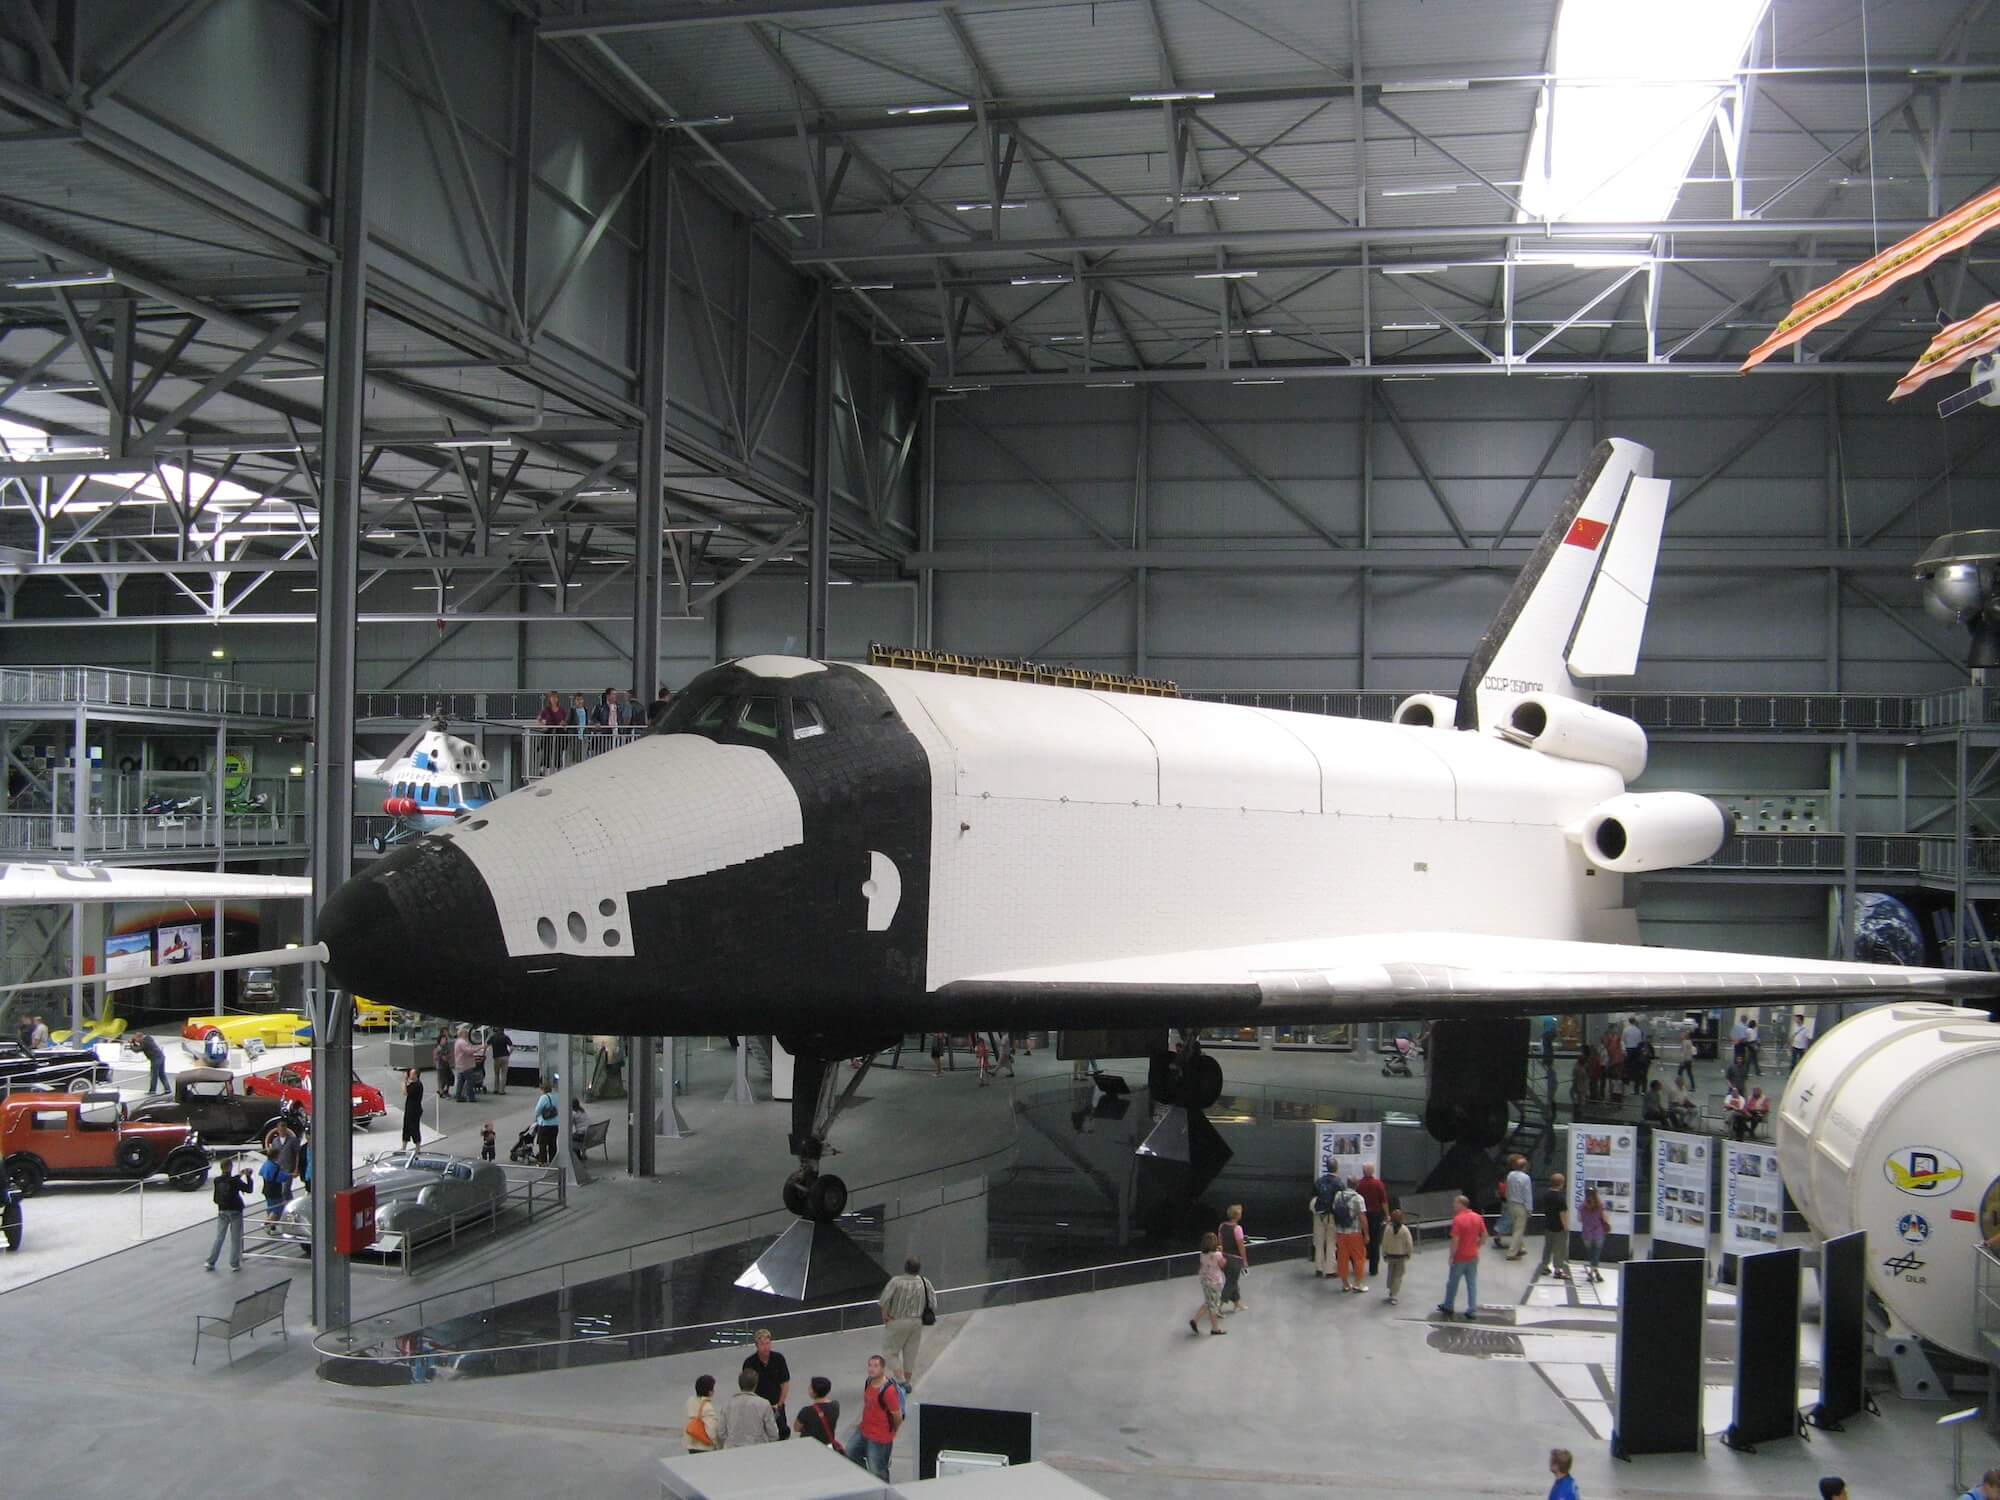 Buran aerodynamic analogue in a museum in Speyer, Germany.